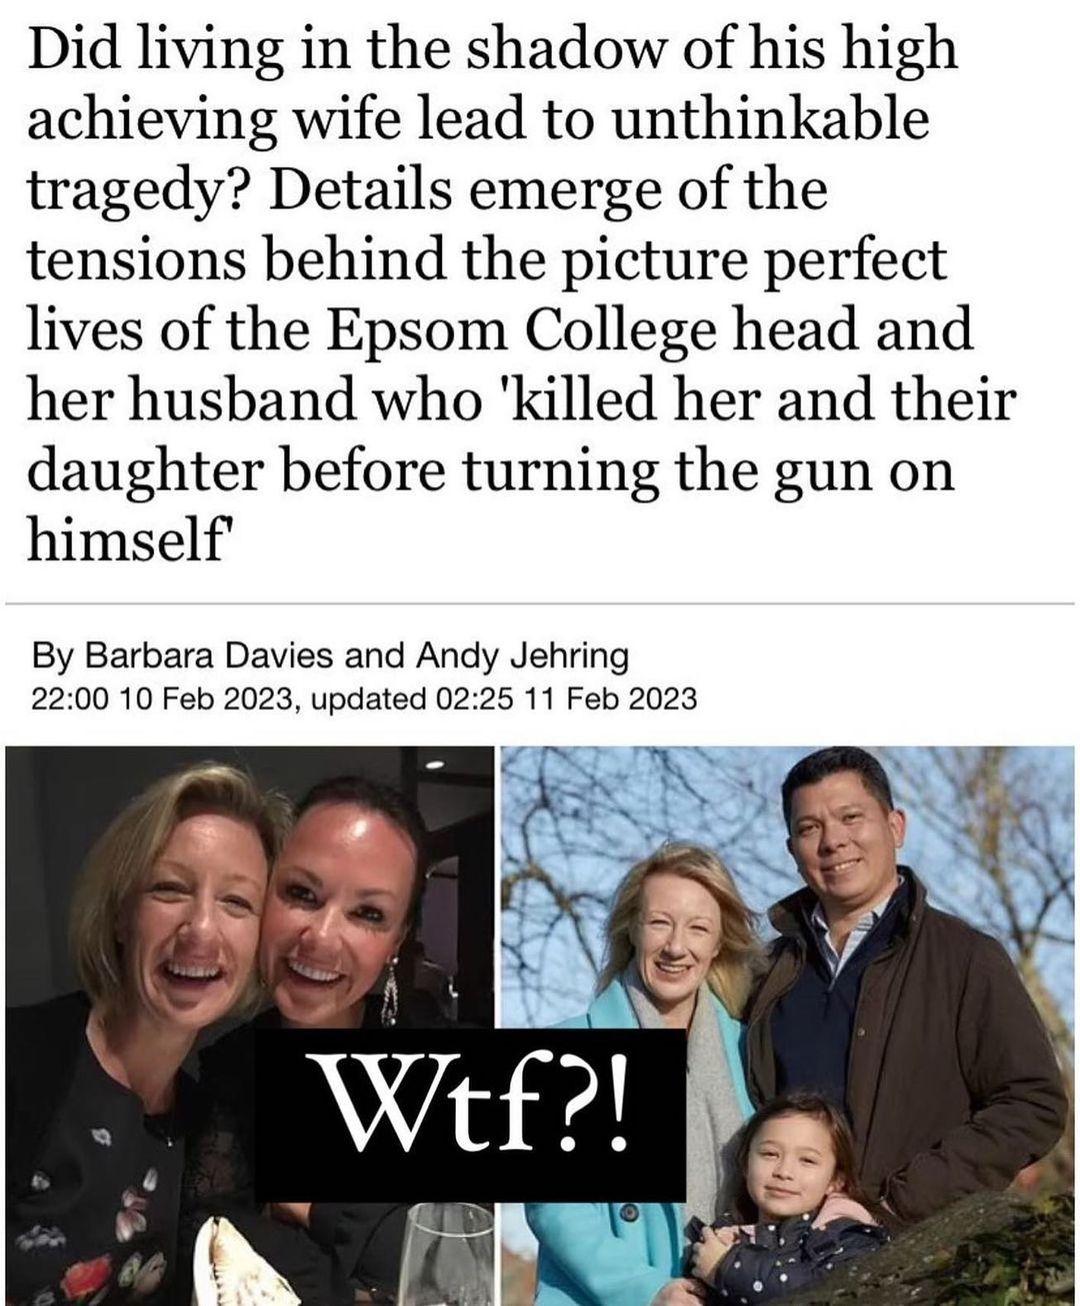 class="content__text"
 Another trash headline, like we need victim blaming!

Posted @withregram • @jameelajamil "Unstable violent man kills wife and daughter" is the only headline we needed. The implicit shaming and fear mongering around women's success in this newspapers choice of headline, is part of a pervasive messaging to hold women back. 

Men's violence against women is at epidemic levels. Leading with something the woman has done is so weird and inappropriate. It's so deliberate.

Go after all your dreams and stay away from people, especially men, who show signs of deep insecurity about that. 

Fuck this archaic and damaging messaging. 

"Tragedy..." FFS. It's cold blooded murder.

 #guiltyfeminist #guiltyfeministpodcast #theguiltyfeminist #deborahfranceswhite #dfw #feminismeverday #feministissues #feminismuk #feminismforall #sexuality #womenssafetymatters #womensafety #violenceagainstwomen 
 